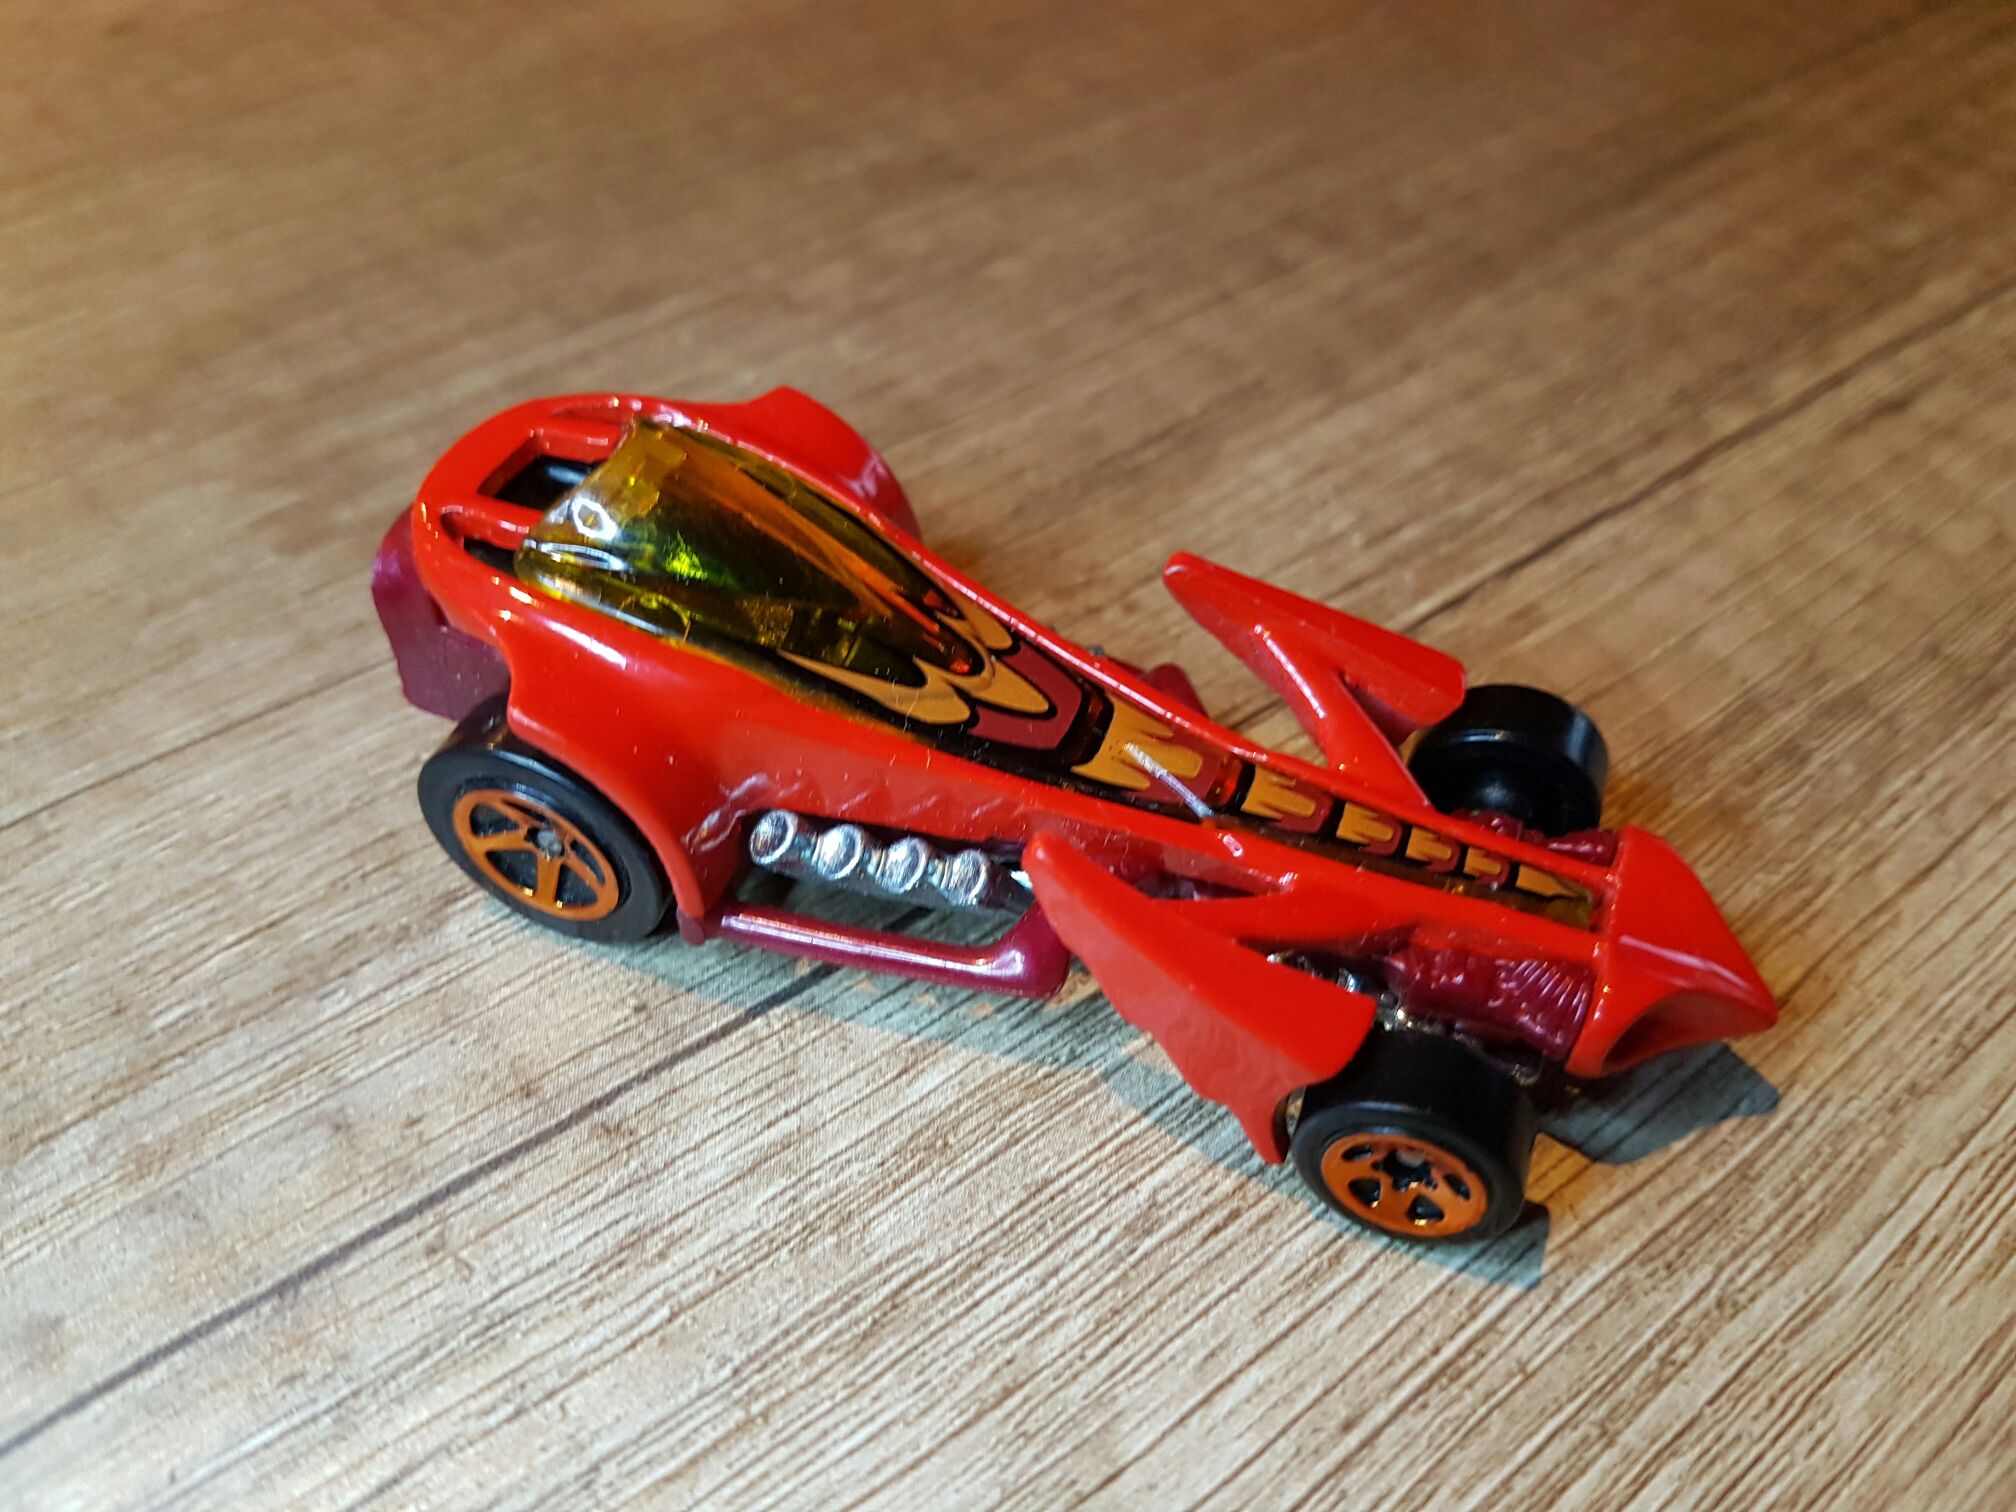 Preying Menace - Street Beasts toy car collectible - Main Image 1